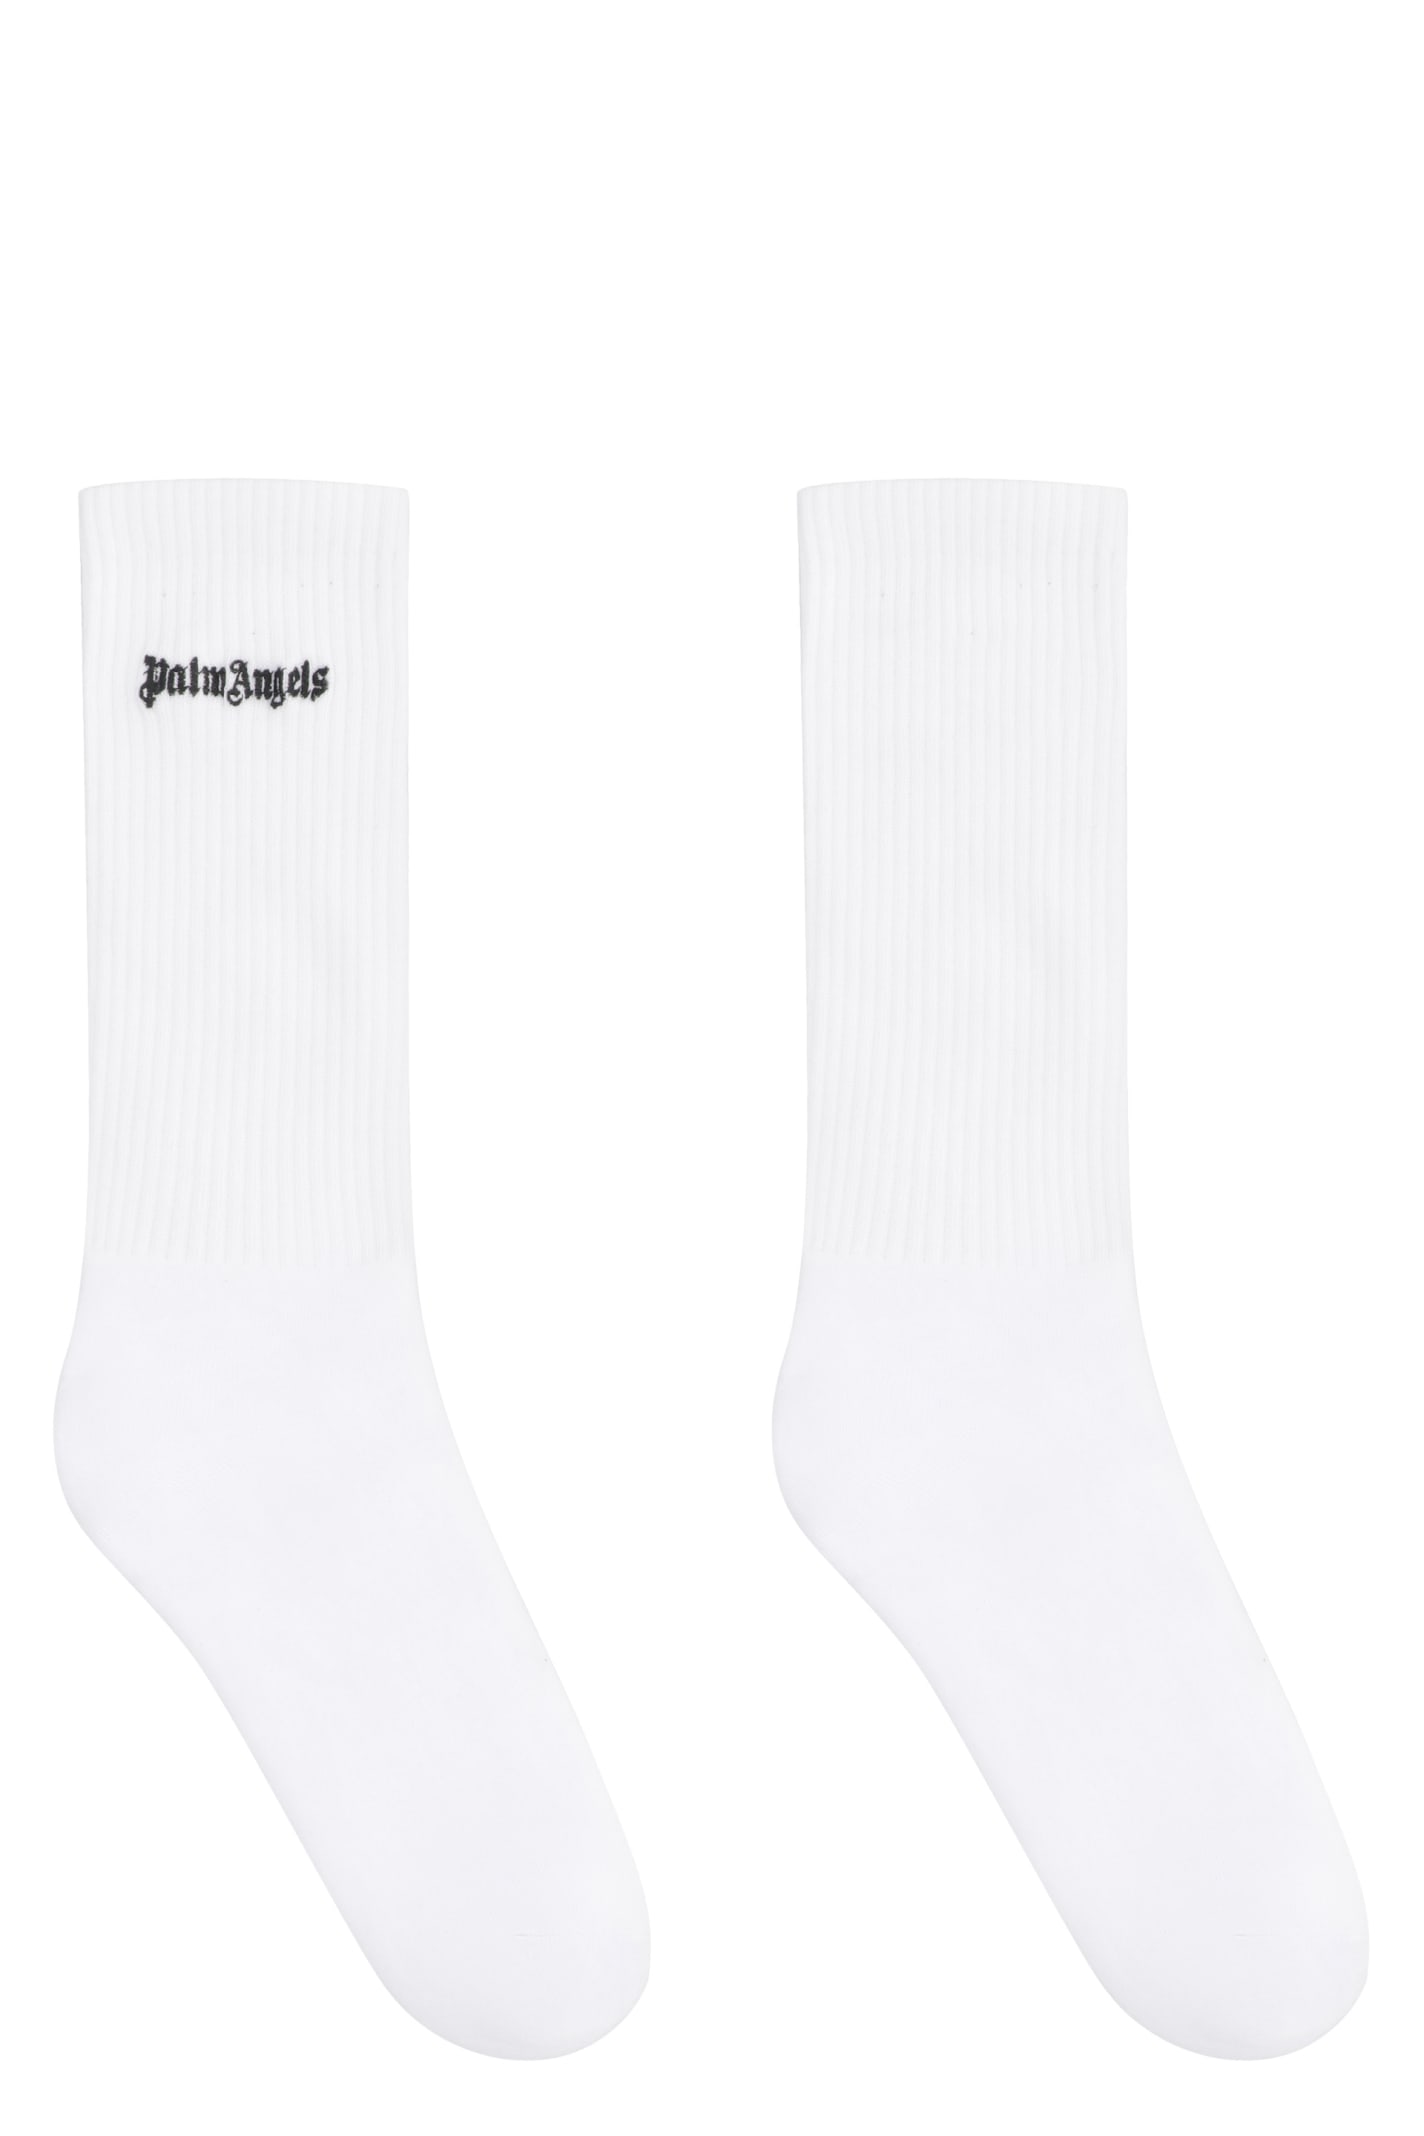 Palm Angels Cotton Socks With Logo